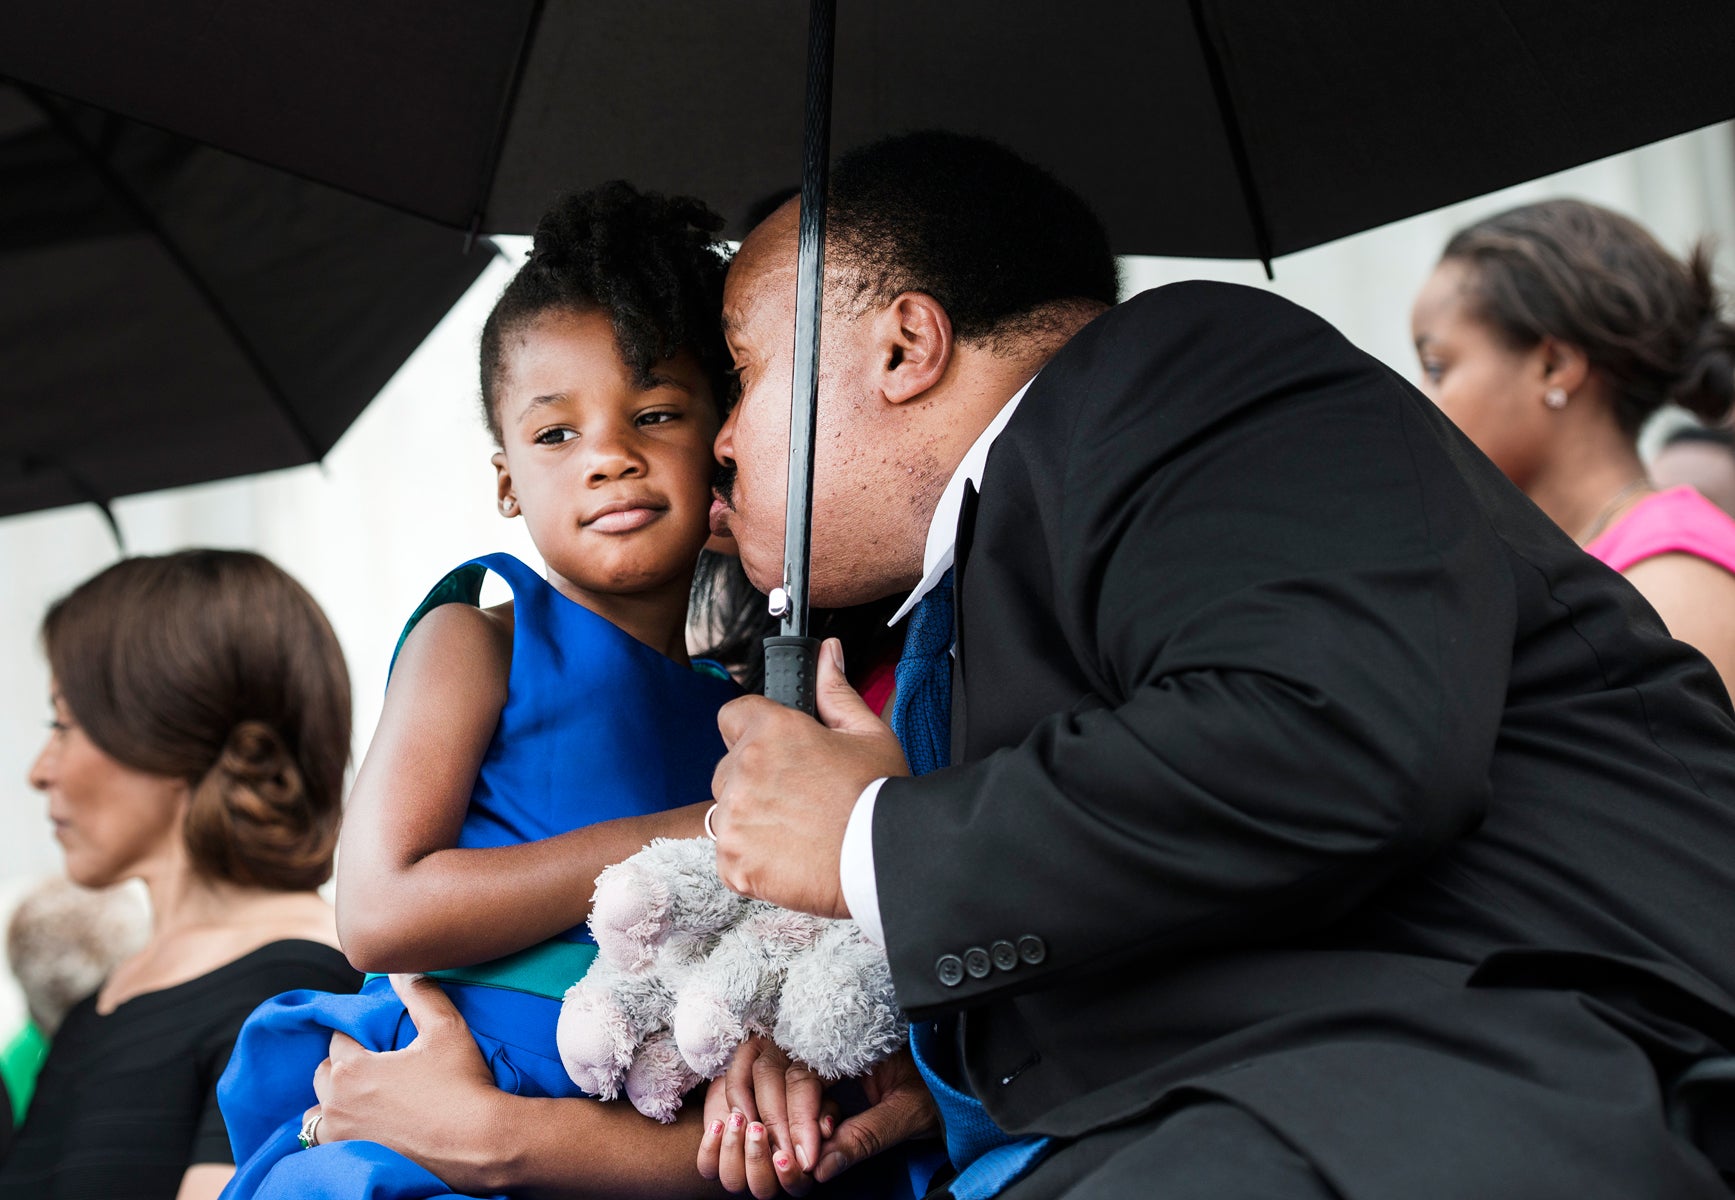 PHOTOS: Thousands Join President Obama to Celebrate 50th Anniversary of March on Washington